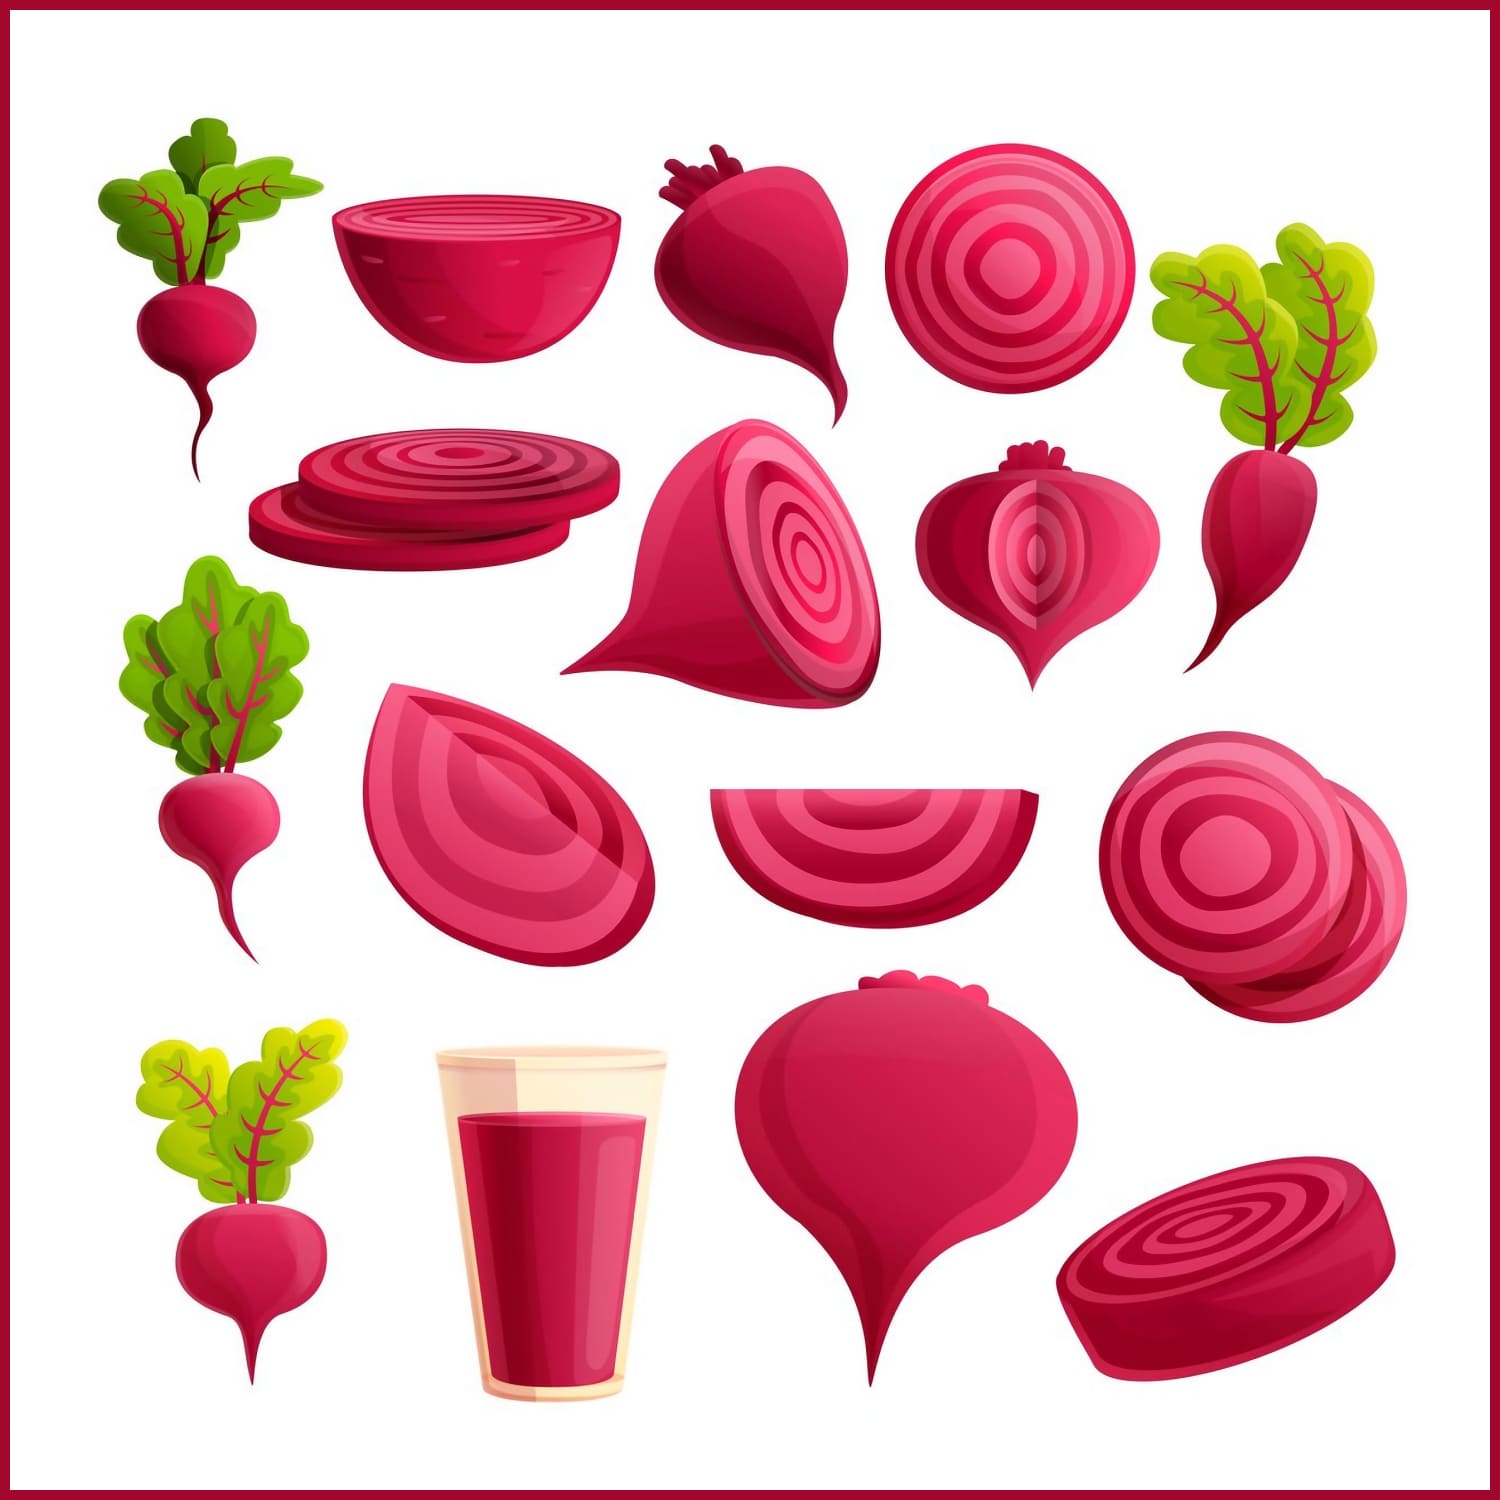 Beet icons set, cartoon style cover.